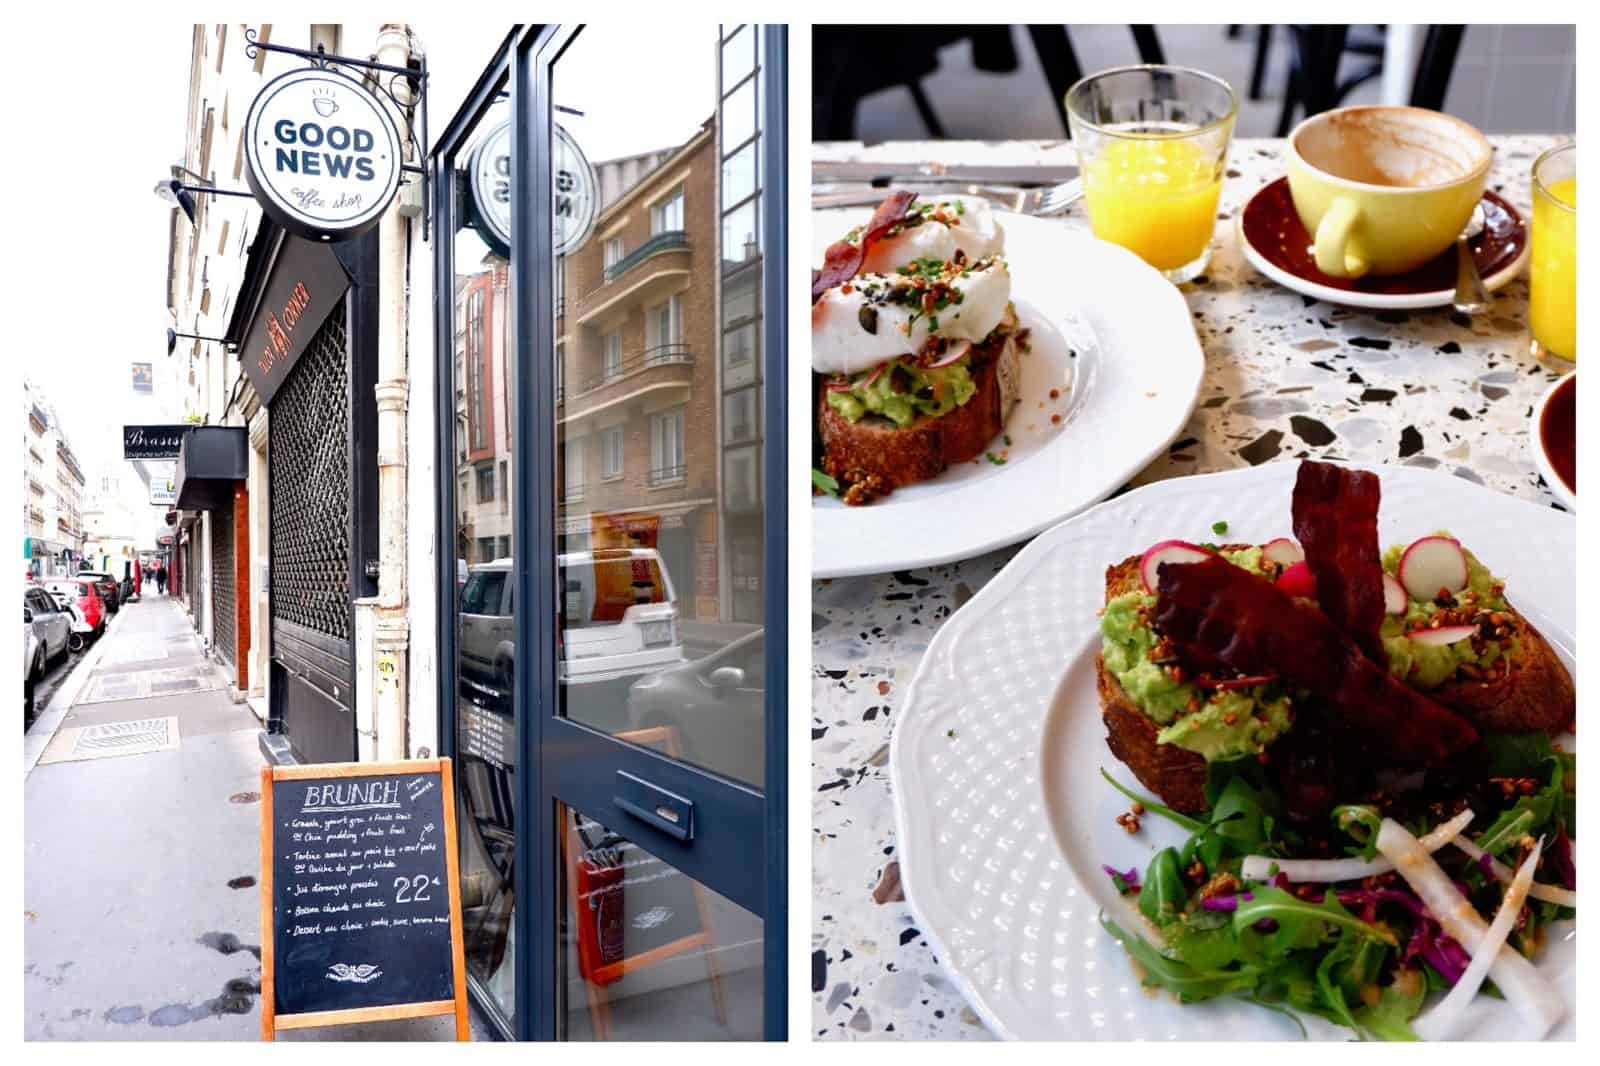 The chalk-board menu outside on the sidewalk (left) and an avocado toast with sliced radish (right) at Good News Australian-inspired coffee shop in Paris